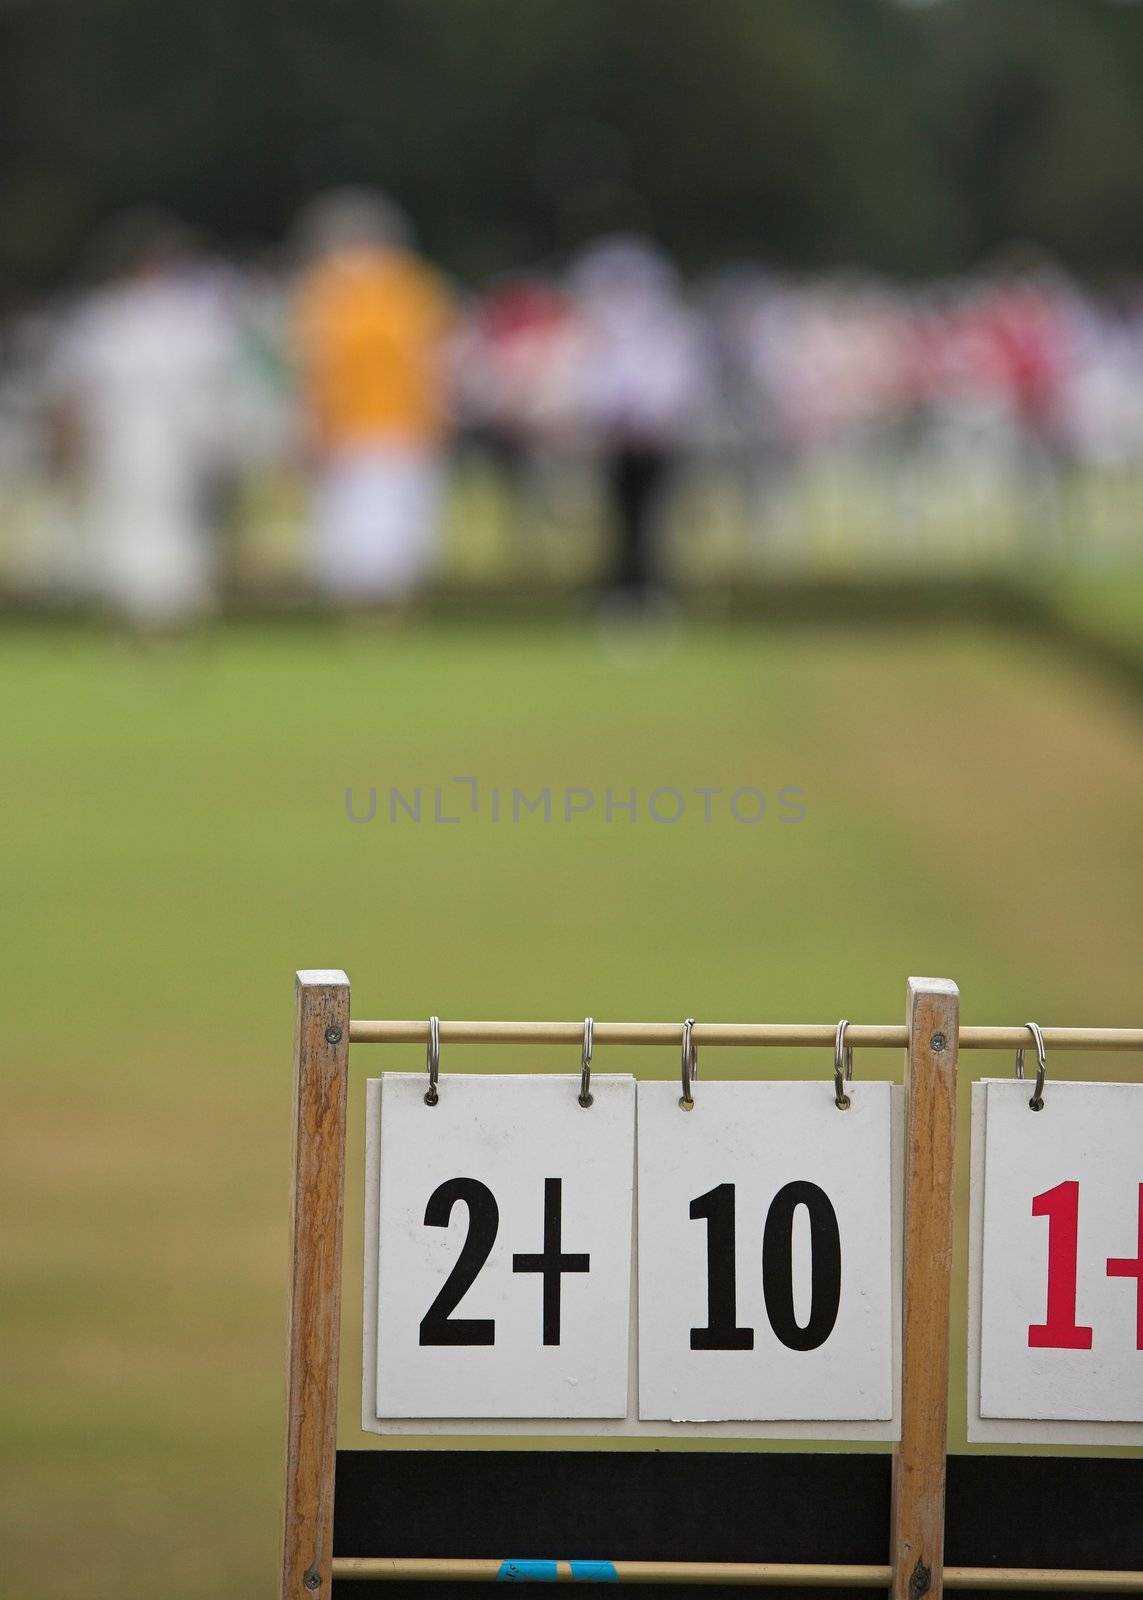 A game of lawn bowls with focus on the scoreboard.